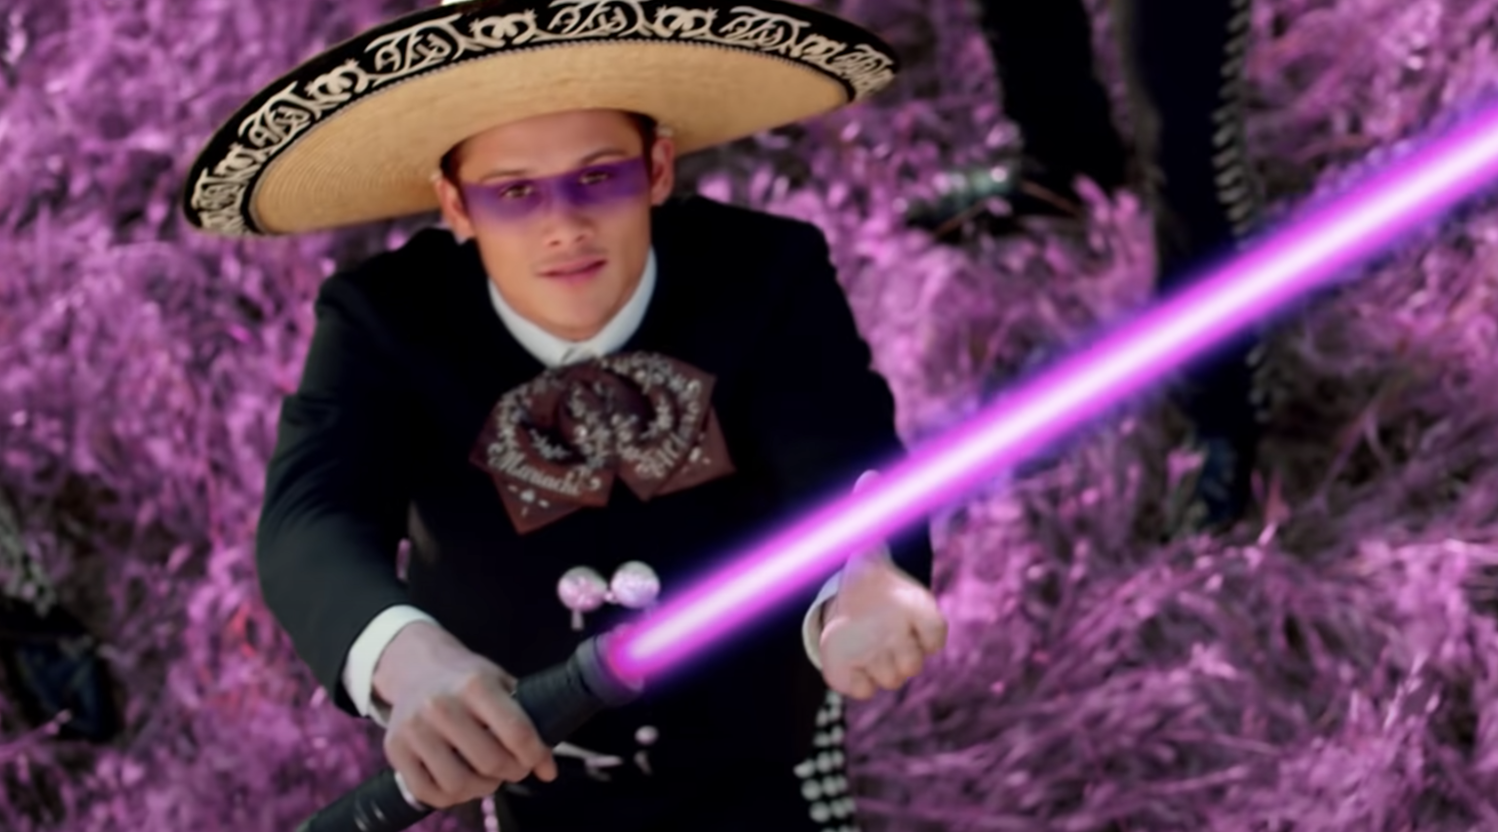 Timothy in the music video with a sombrero and lightsaber